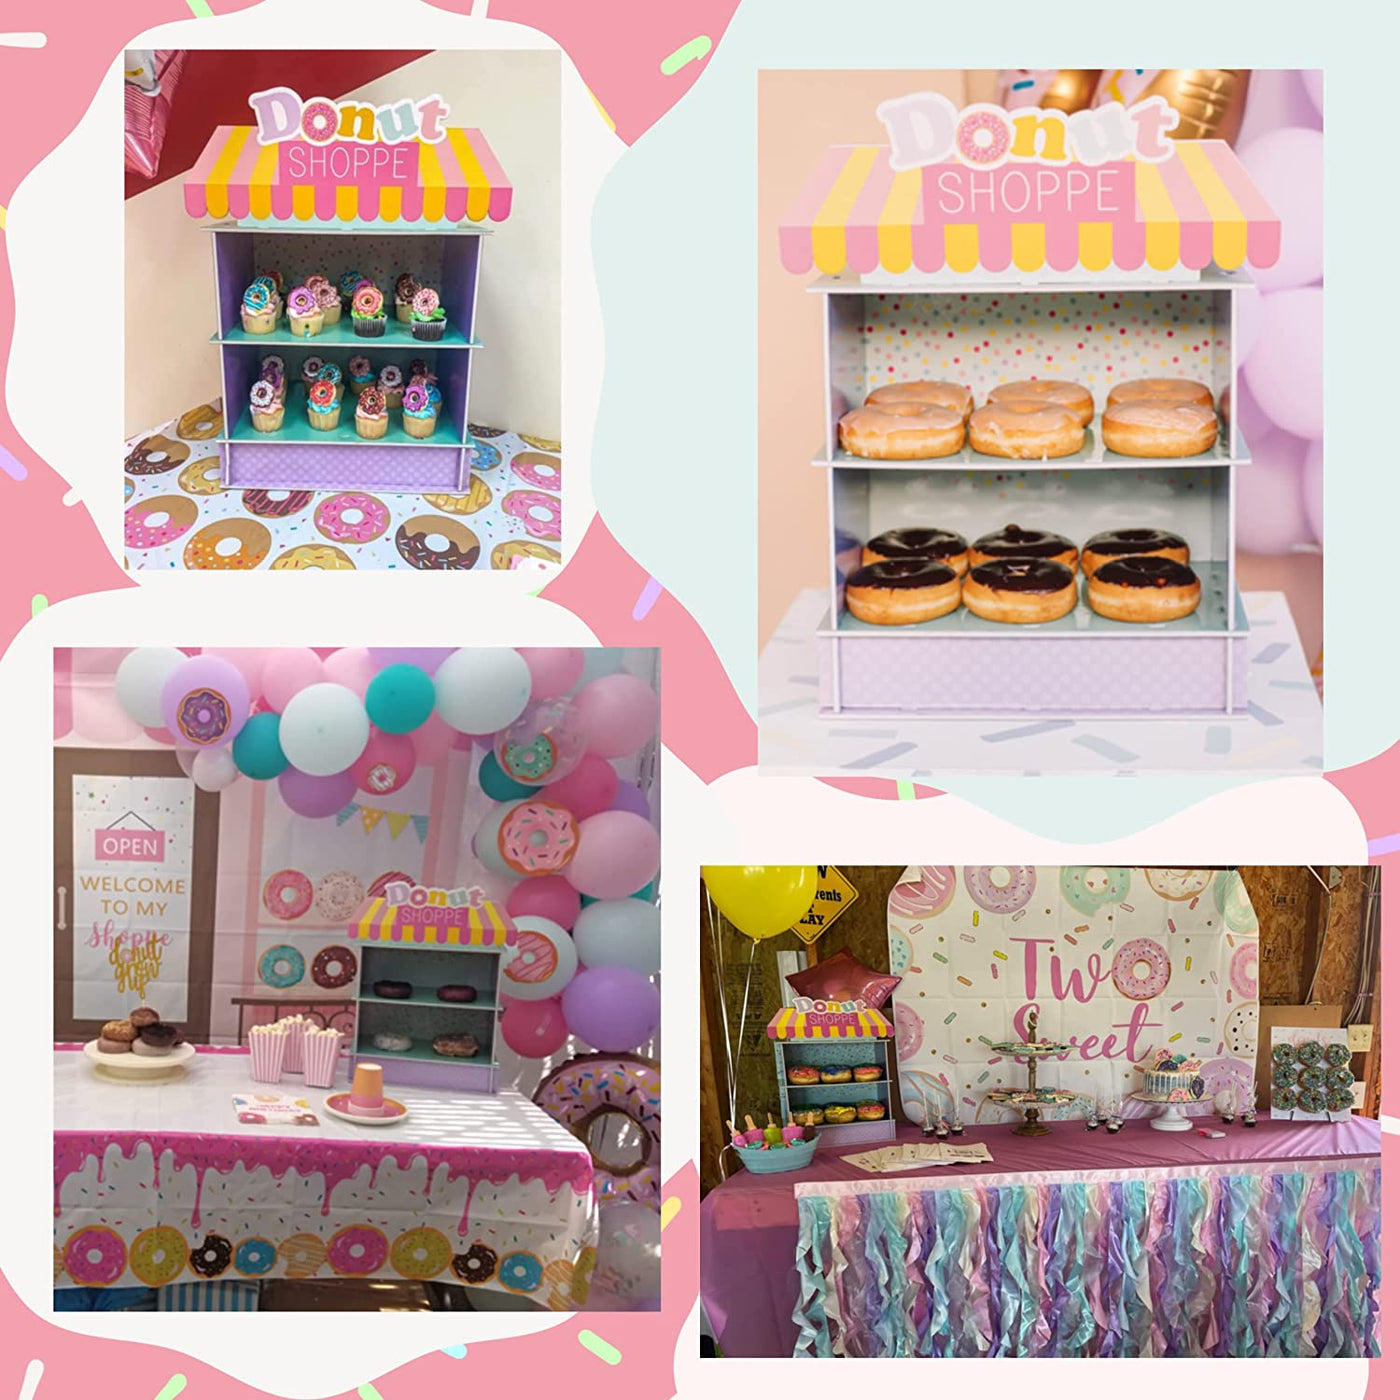 Donut Stand for Donut Birthday Party Supplies & Decorations, Cupcake Stand Dessert Table Centerpiece by 4E's Novelty